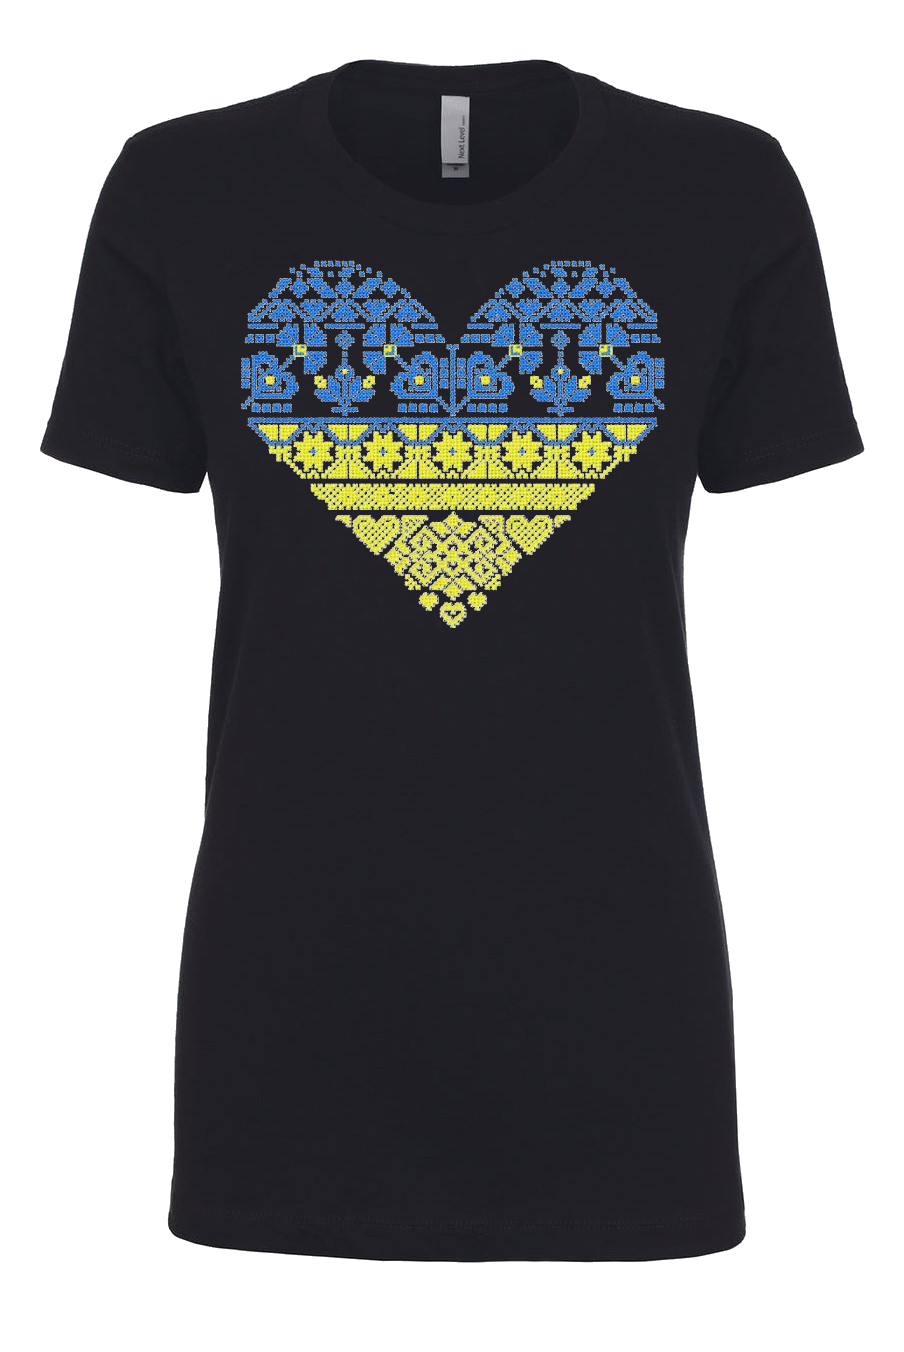 Female fit t-shirt "Blue and yellow heart"